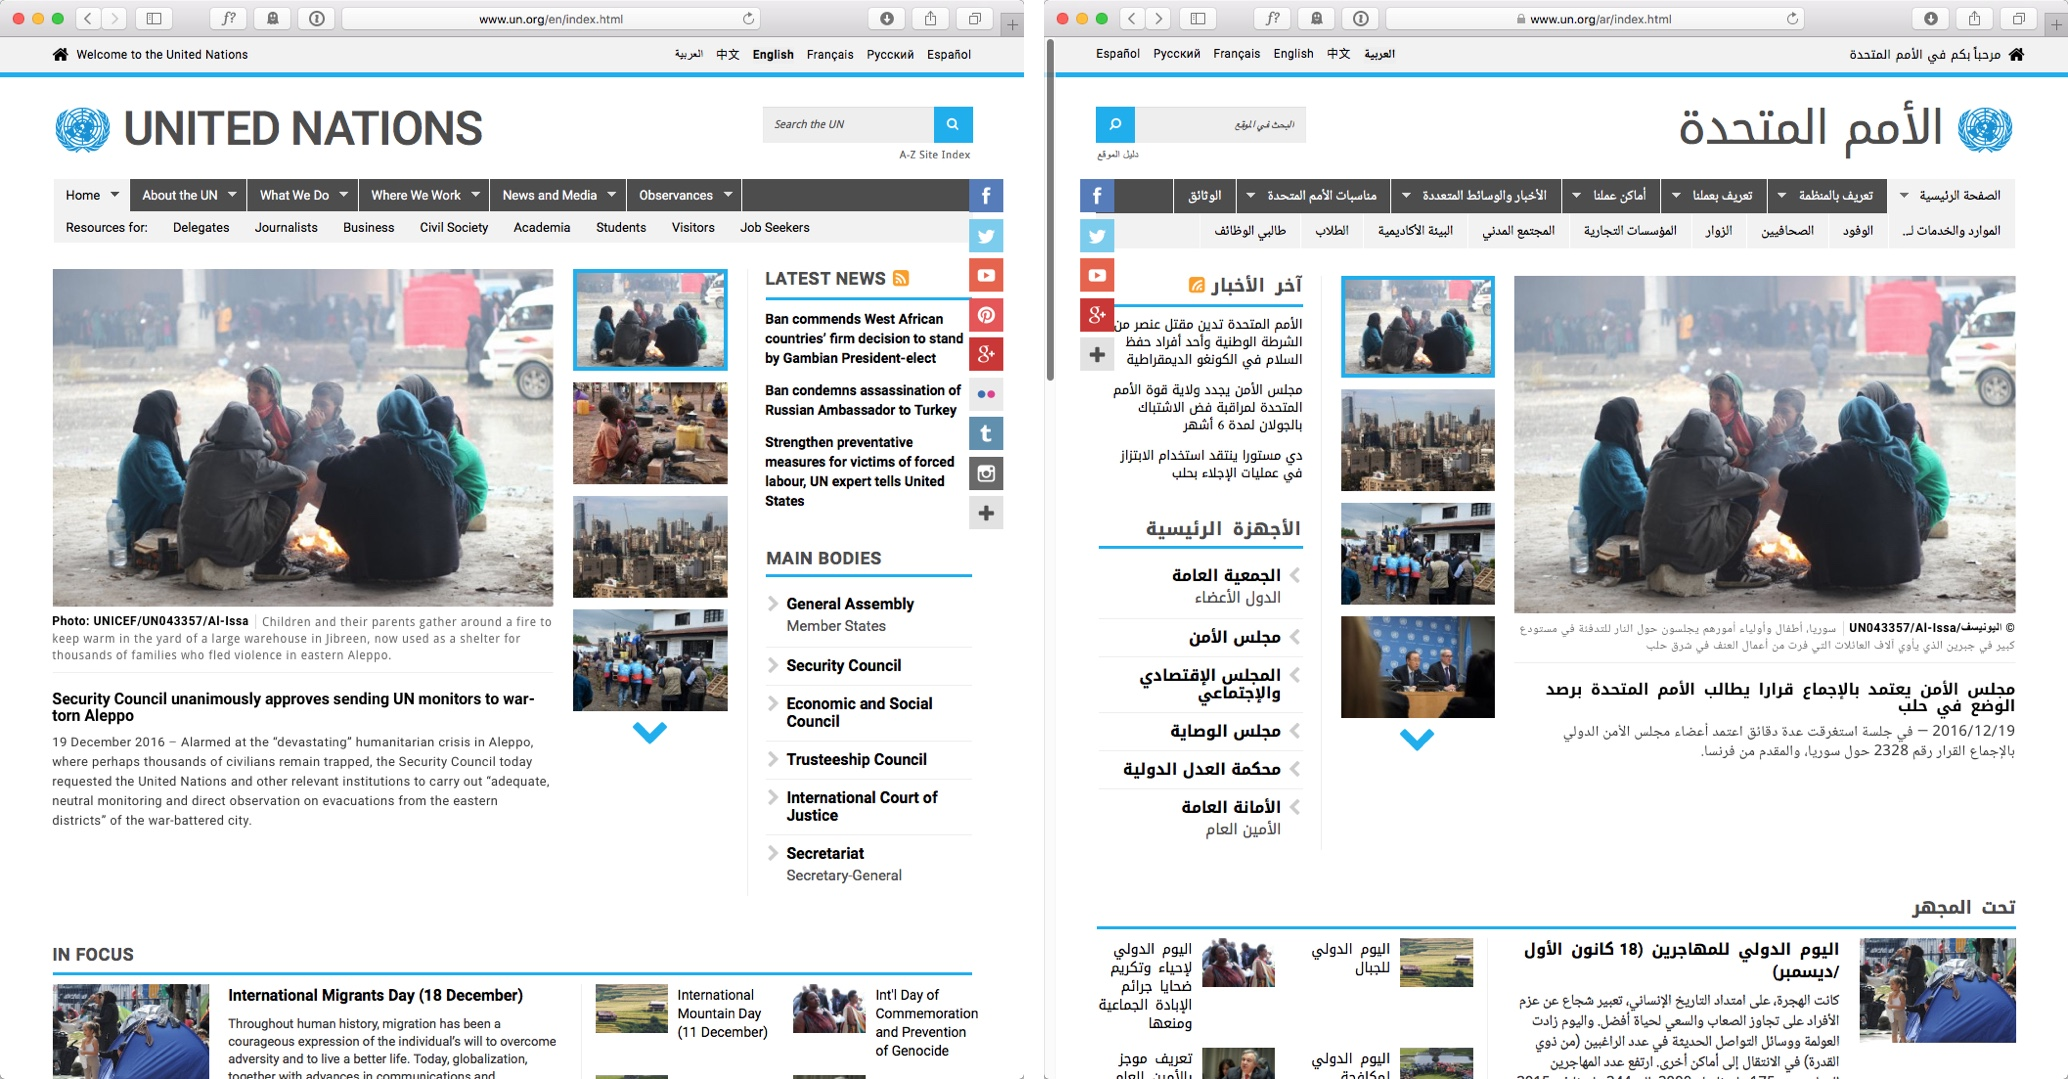 Two side by side screenshots of the United Nations' site, comparing English and Arabic layouts.